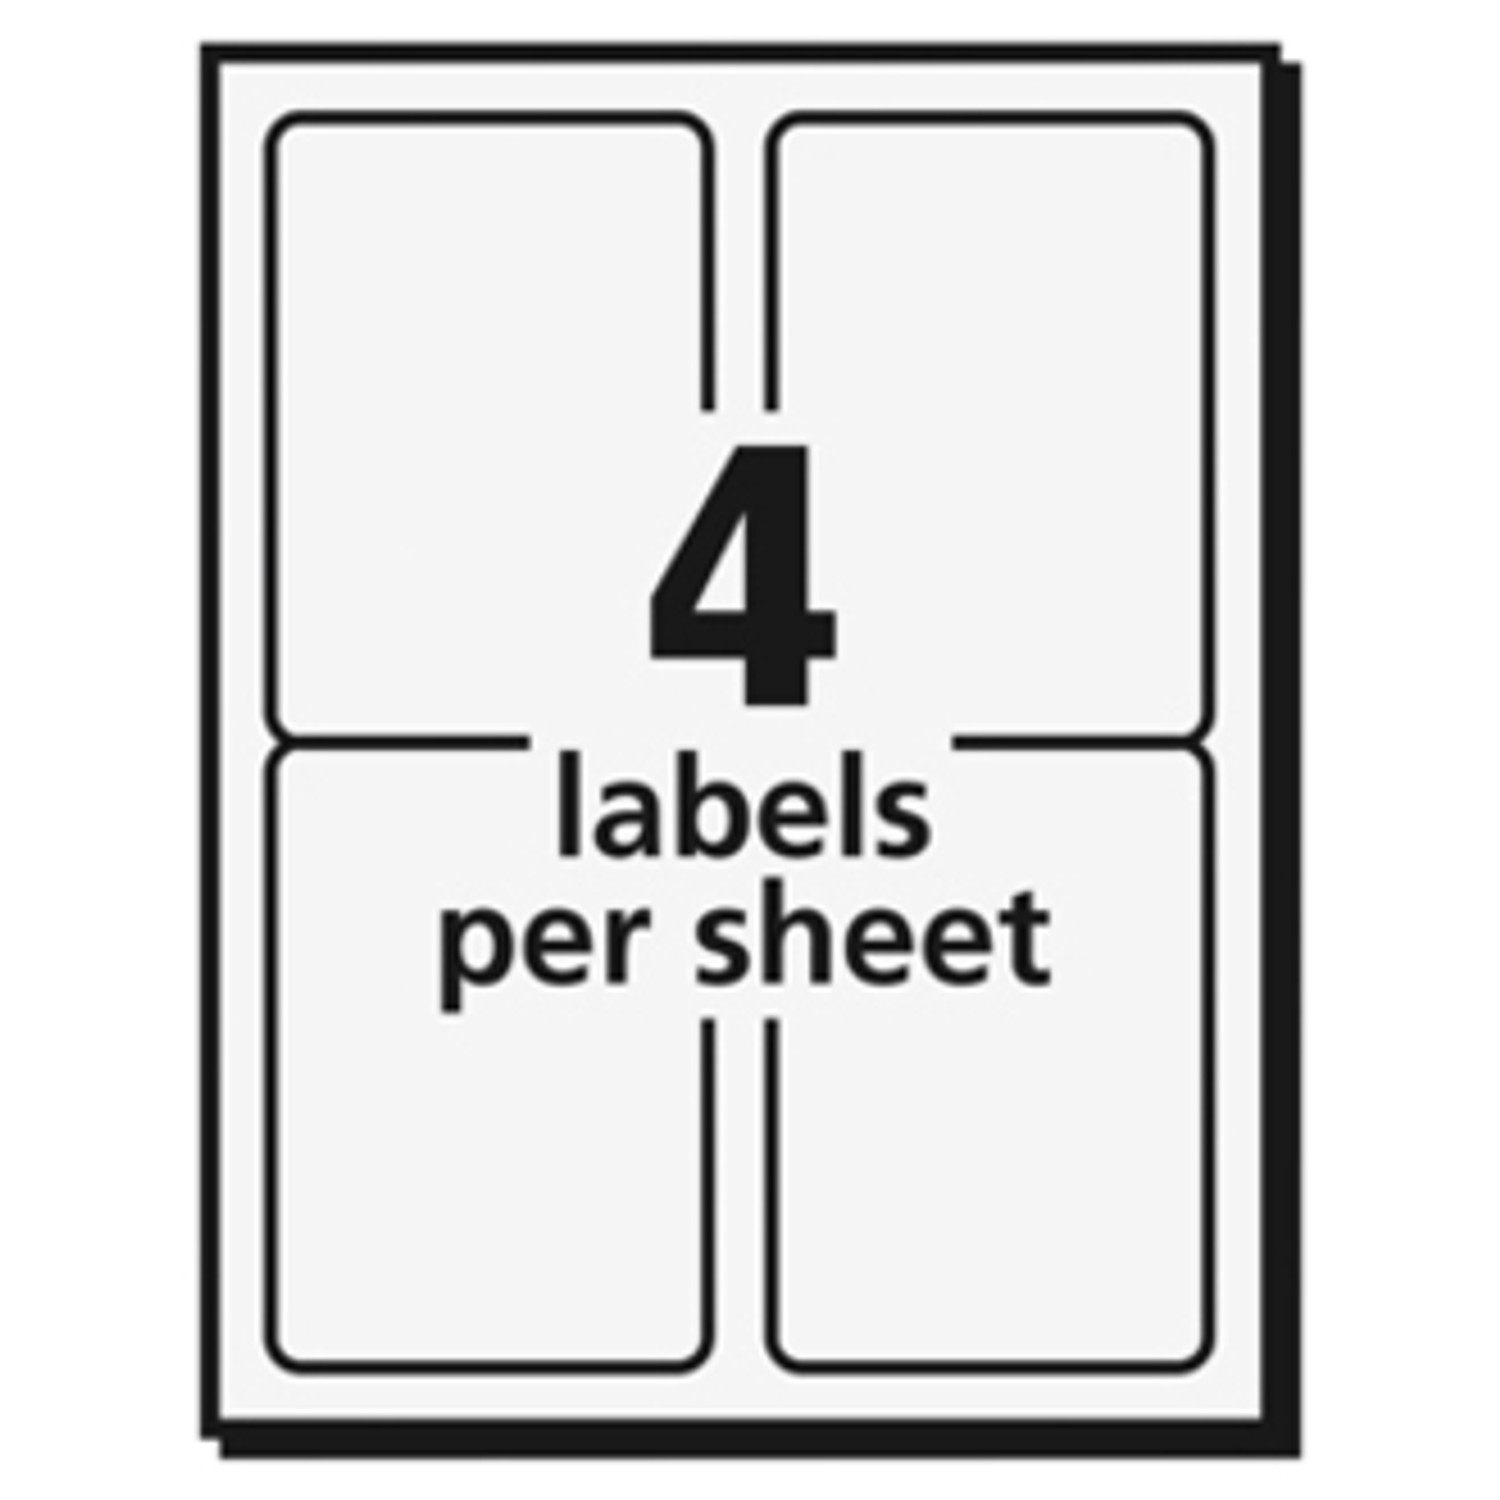 Avery Kids No-Iron Fabric Labels, 6 x 4, White, 15 Labels/Sheet, 3  Sheets/Pack